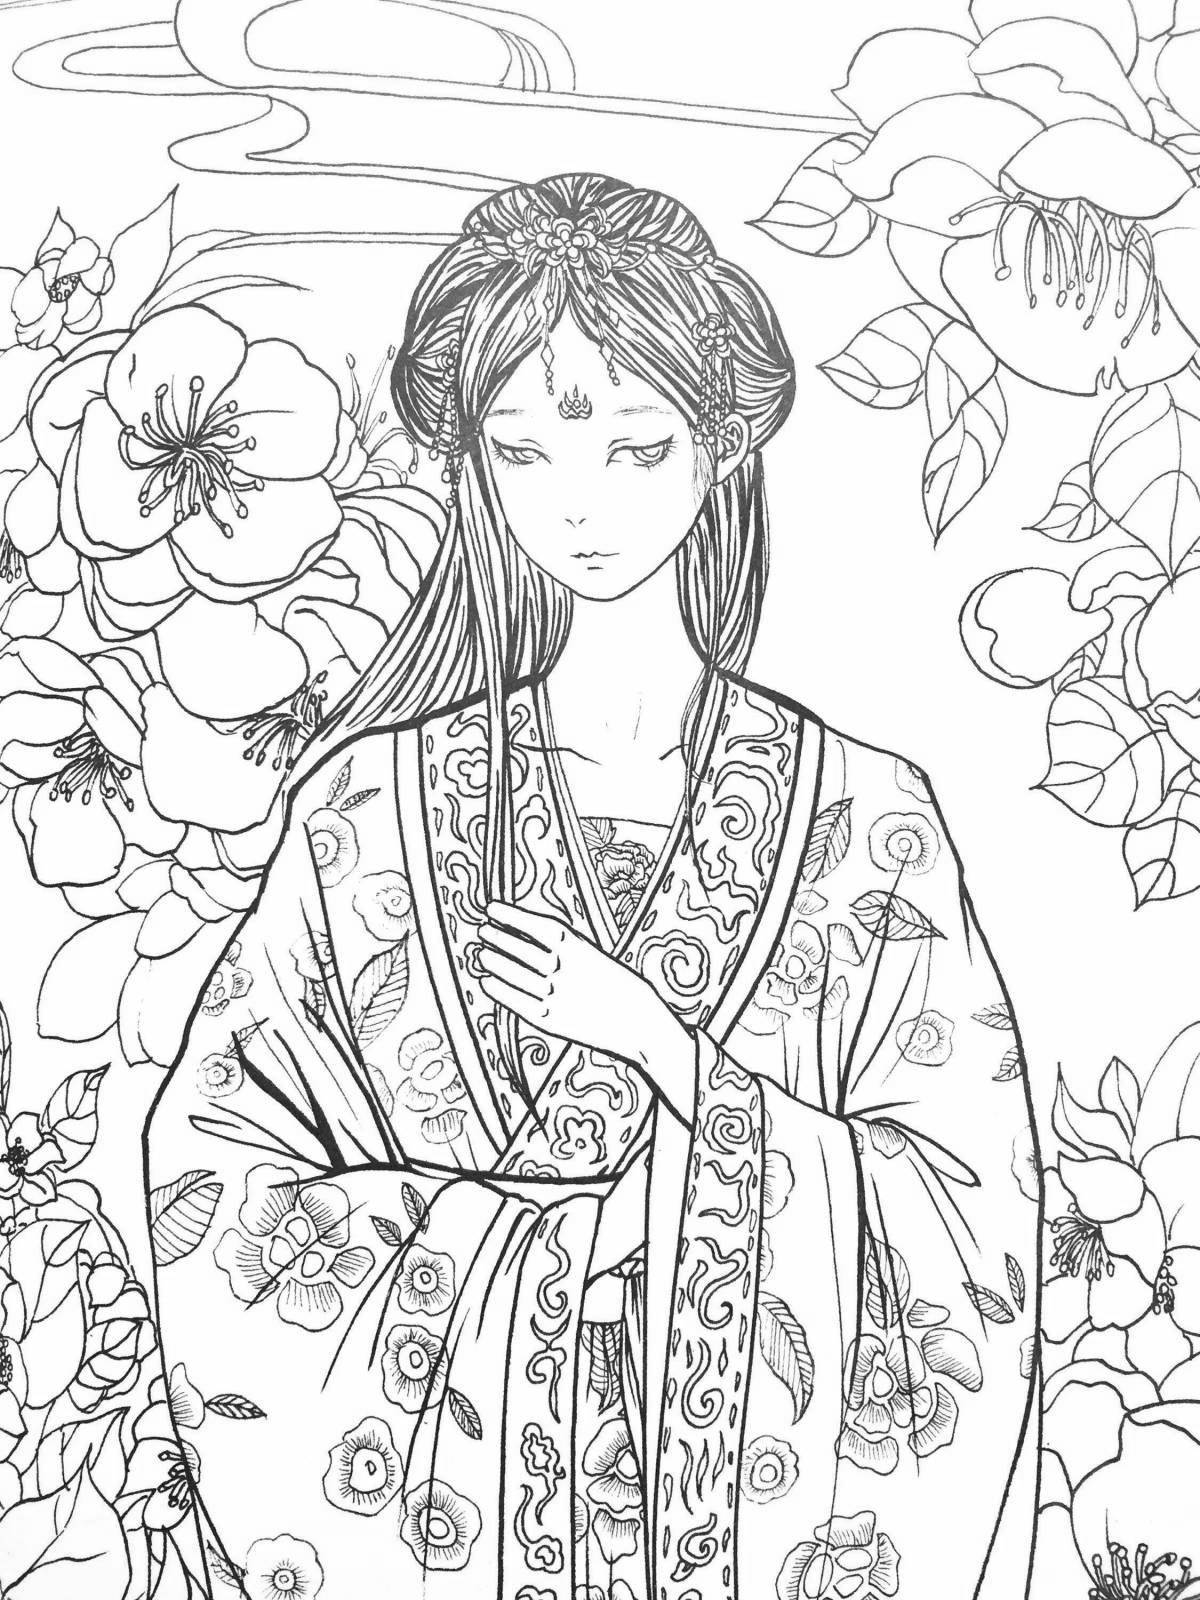 Coloring page violent chinese woman